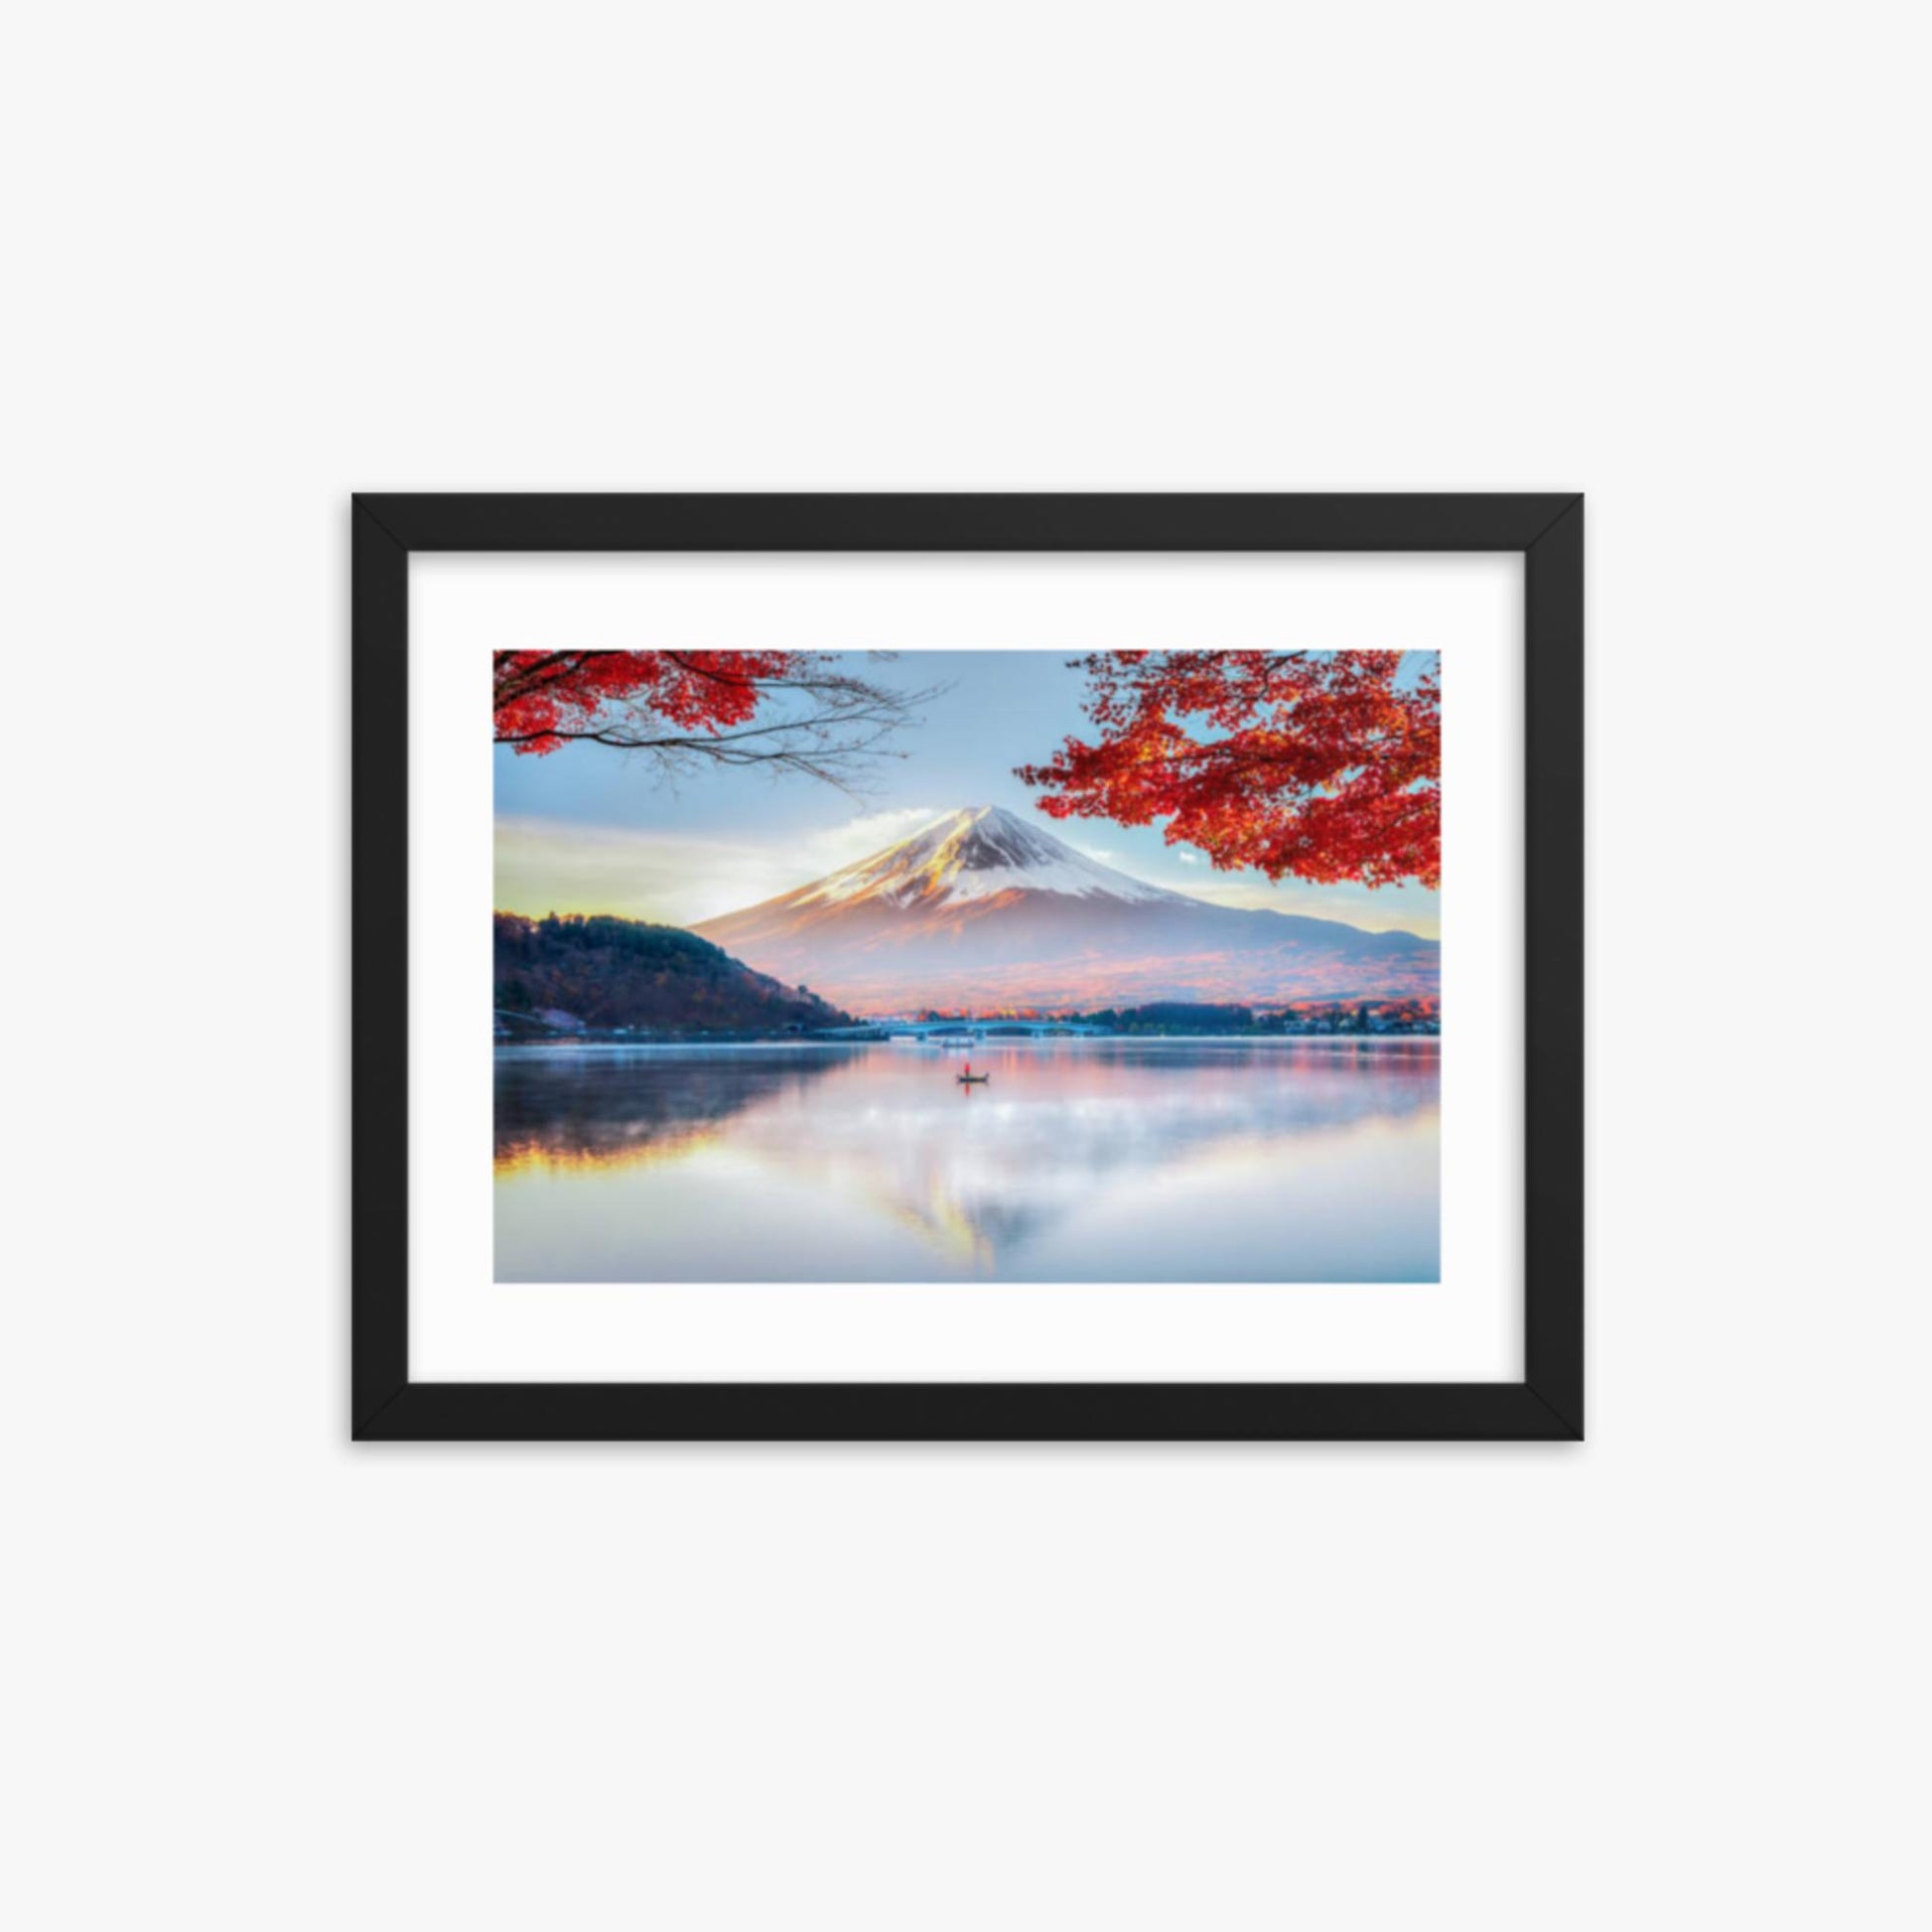 Fuji Mountain , Red Maple Tree and Fisherman Boat with Morning Mist in Autumn, Kawaguchiko Lake, Japan 12x16 in Poster With Black Frame